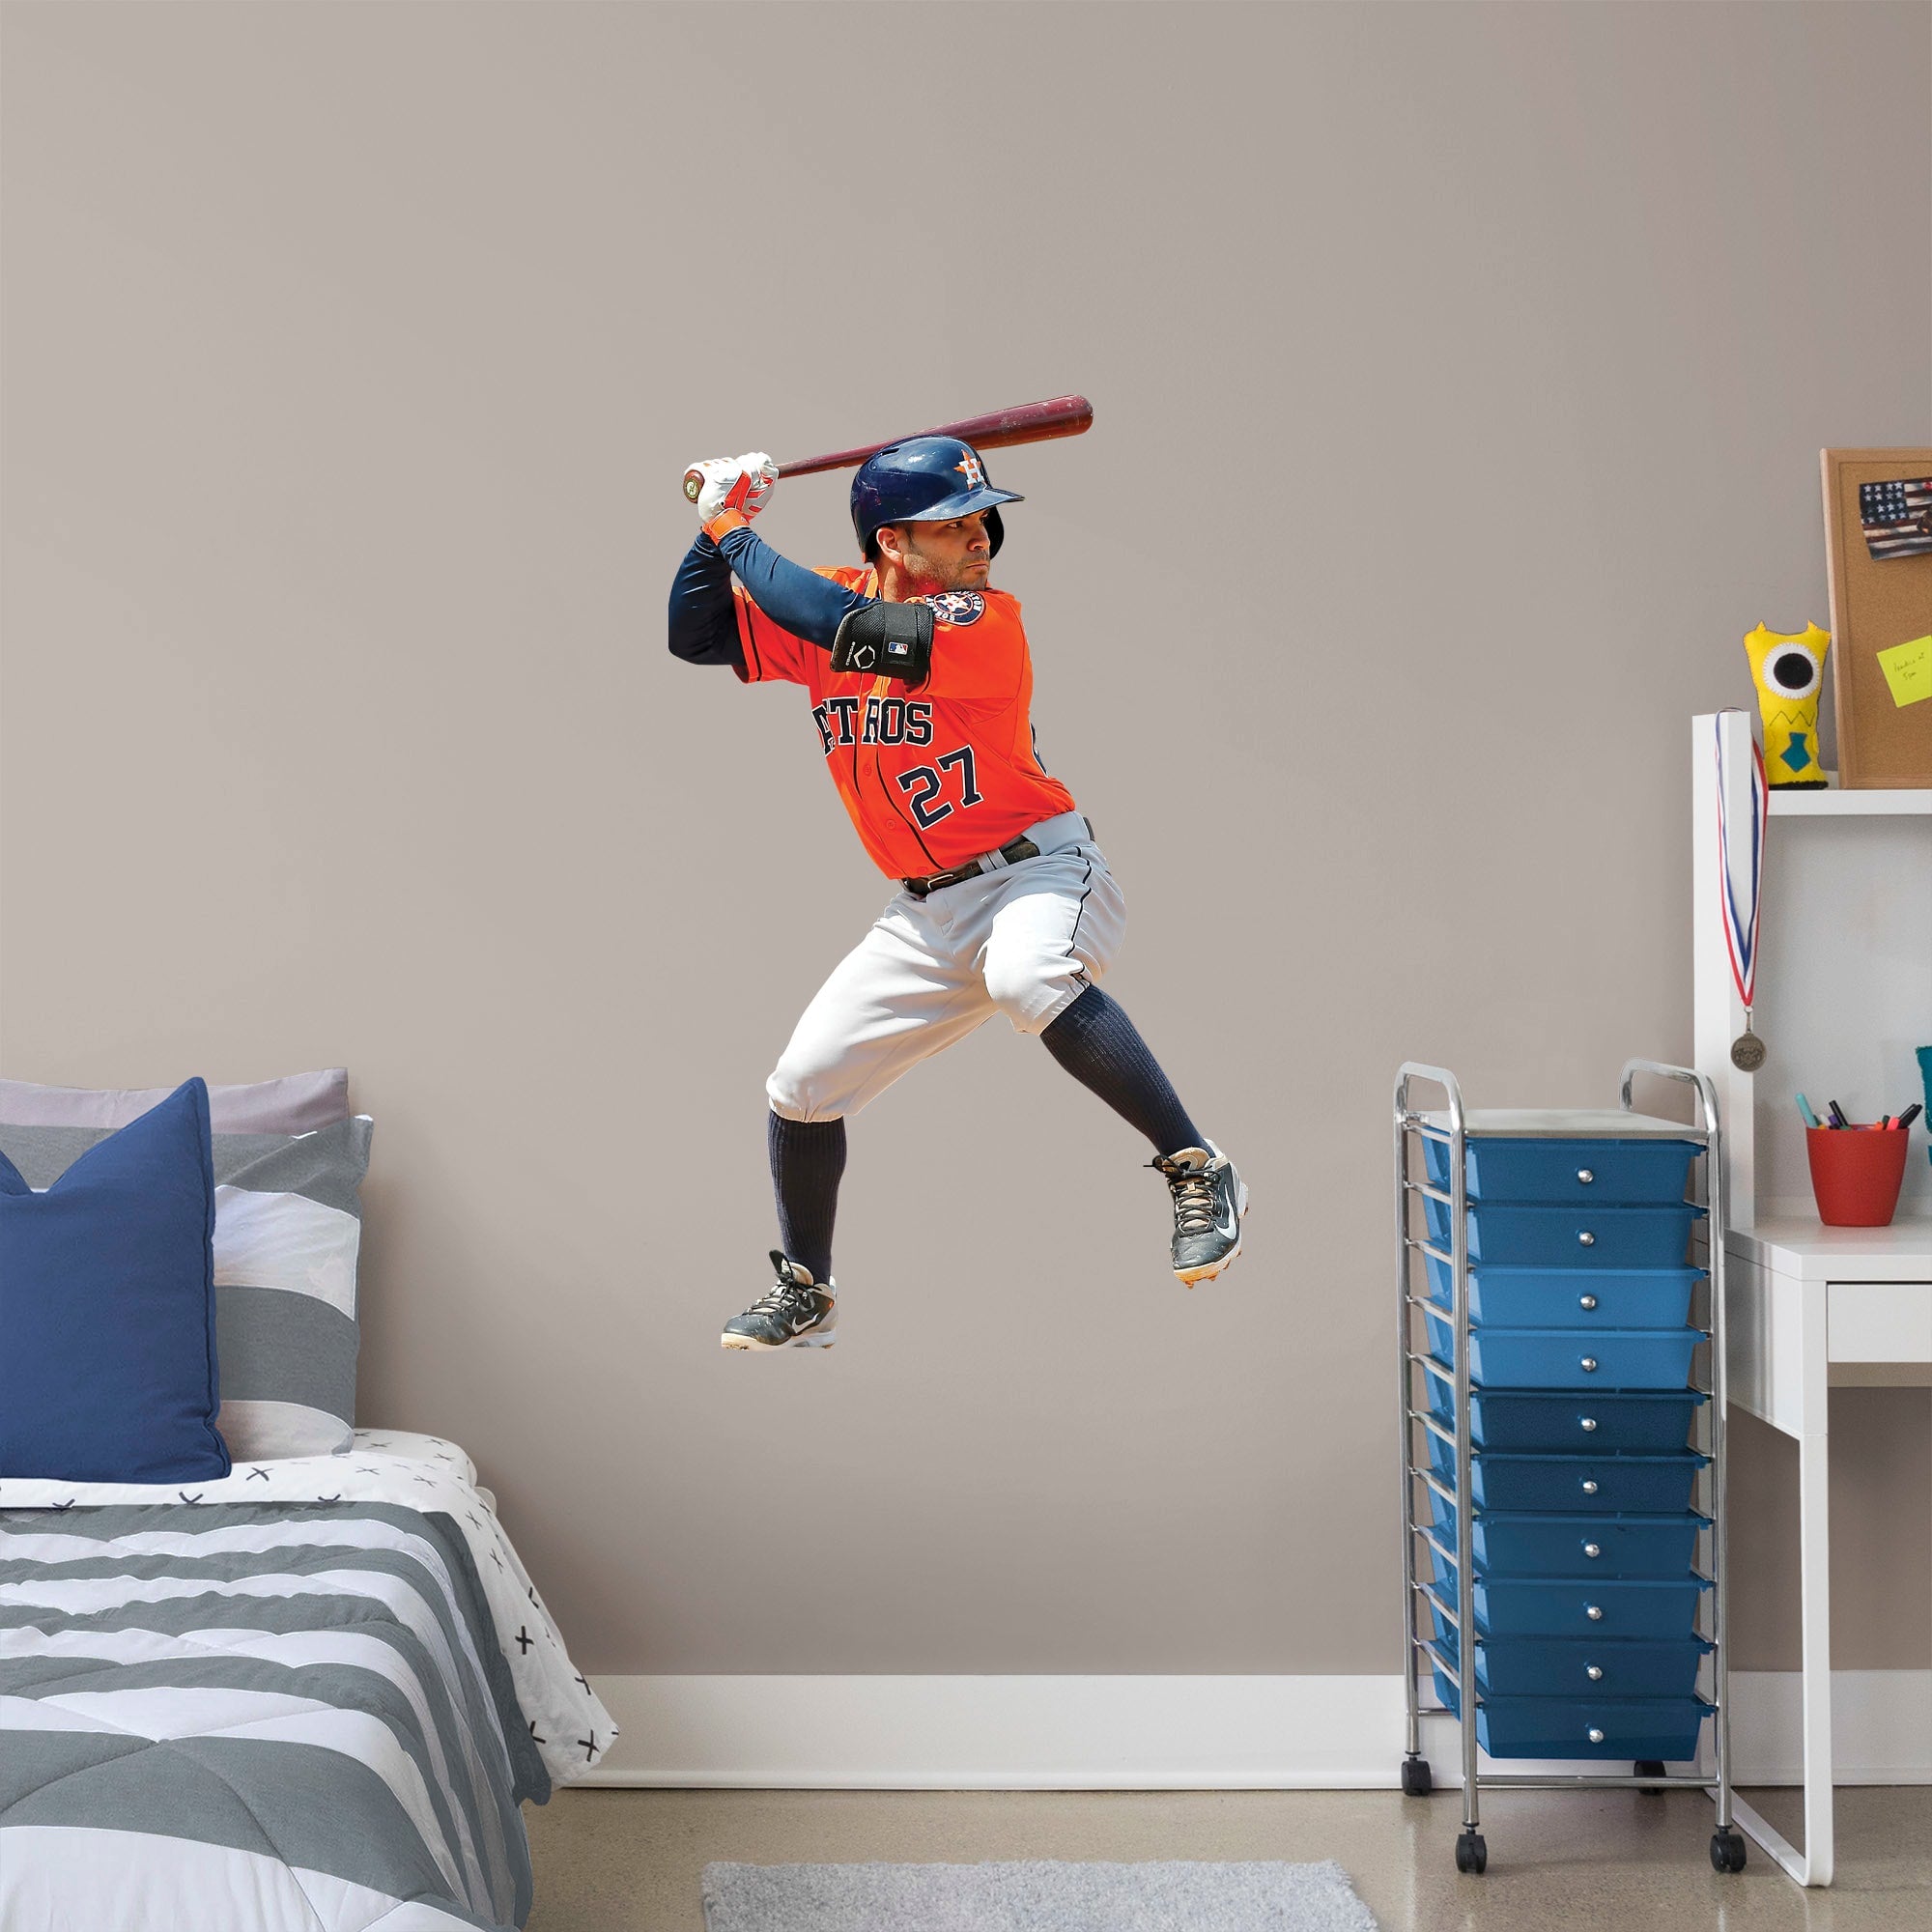 Jose Altuve for Houston Astros: Batting - Officially Licensed MLB Removable Wall Decal Giant Athlete + 2 Decals (31"W x 51"H) by